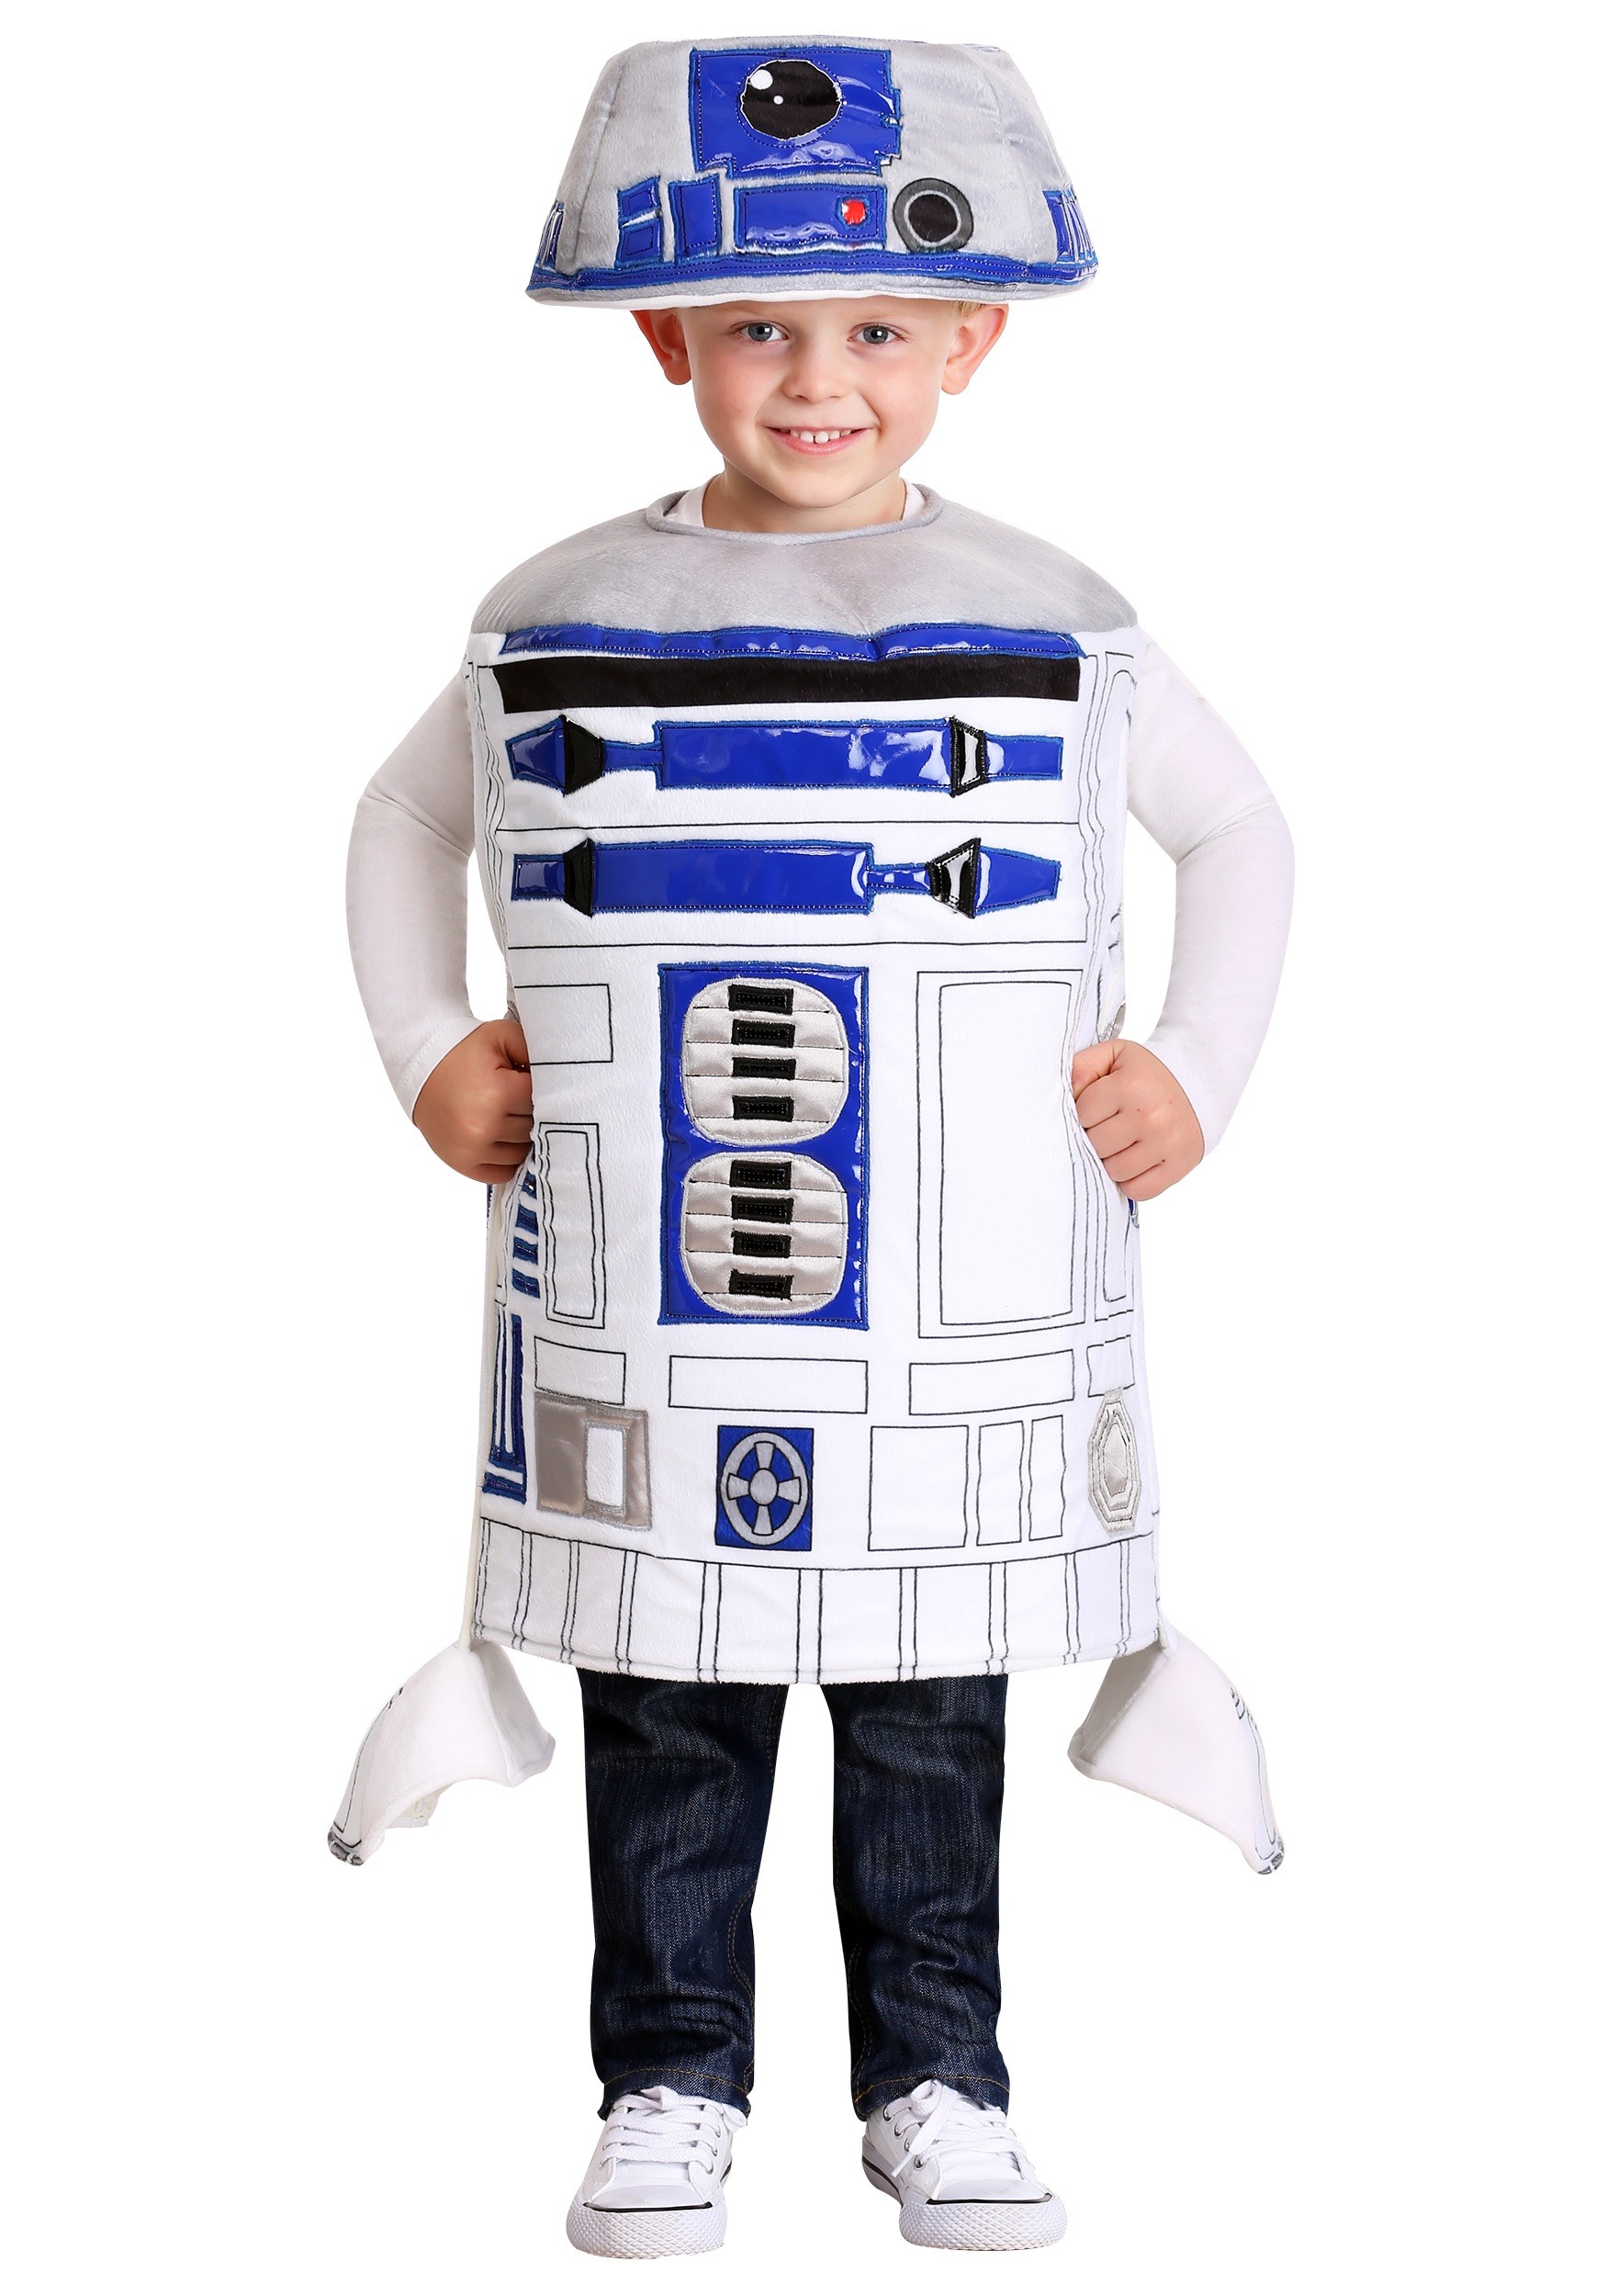 R2D2 Costume For Toddler , Sci Fi Costume , Exclusive